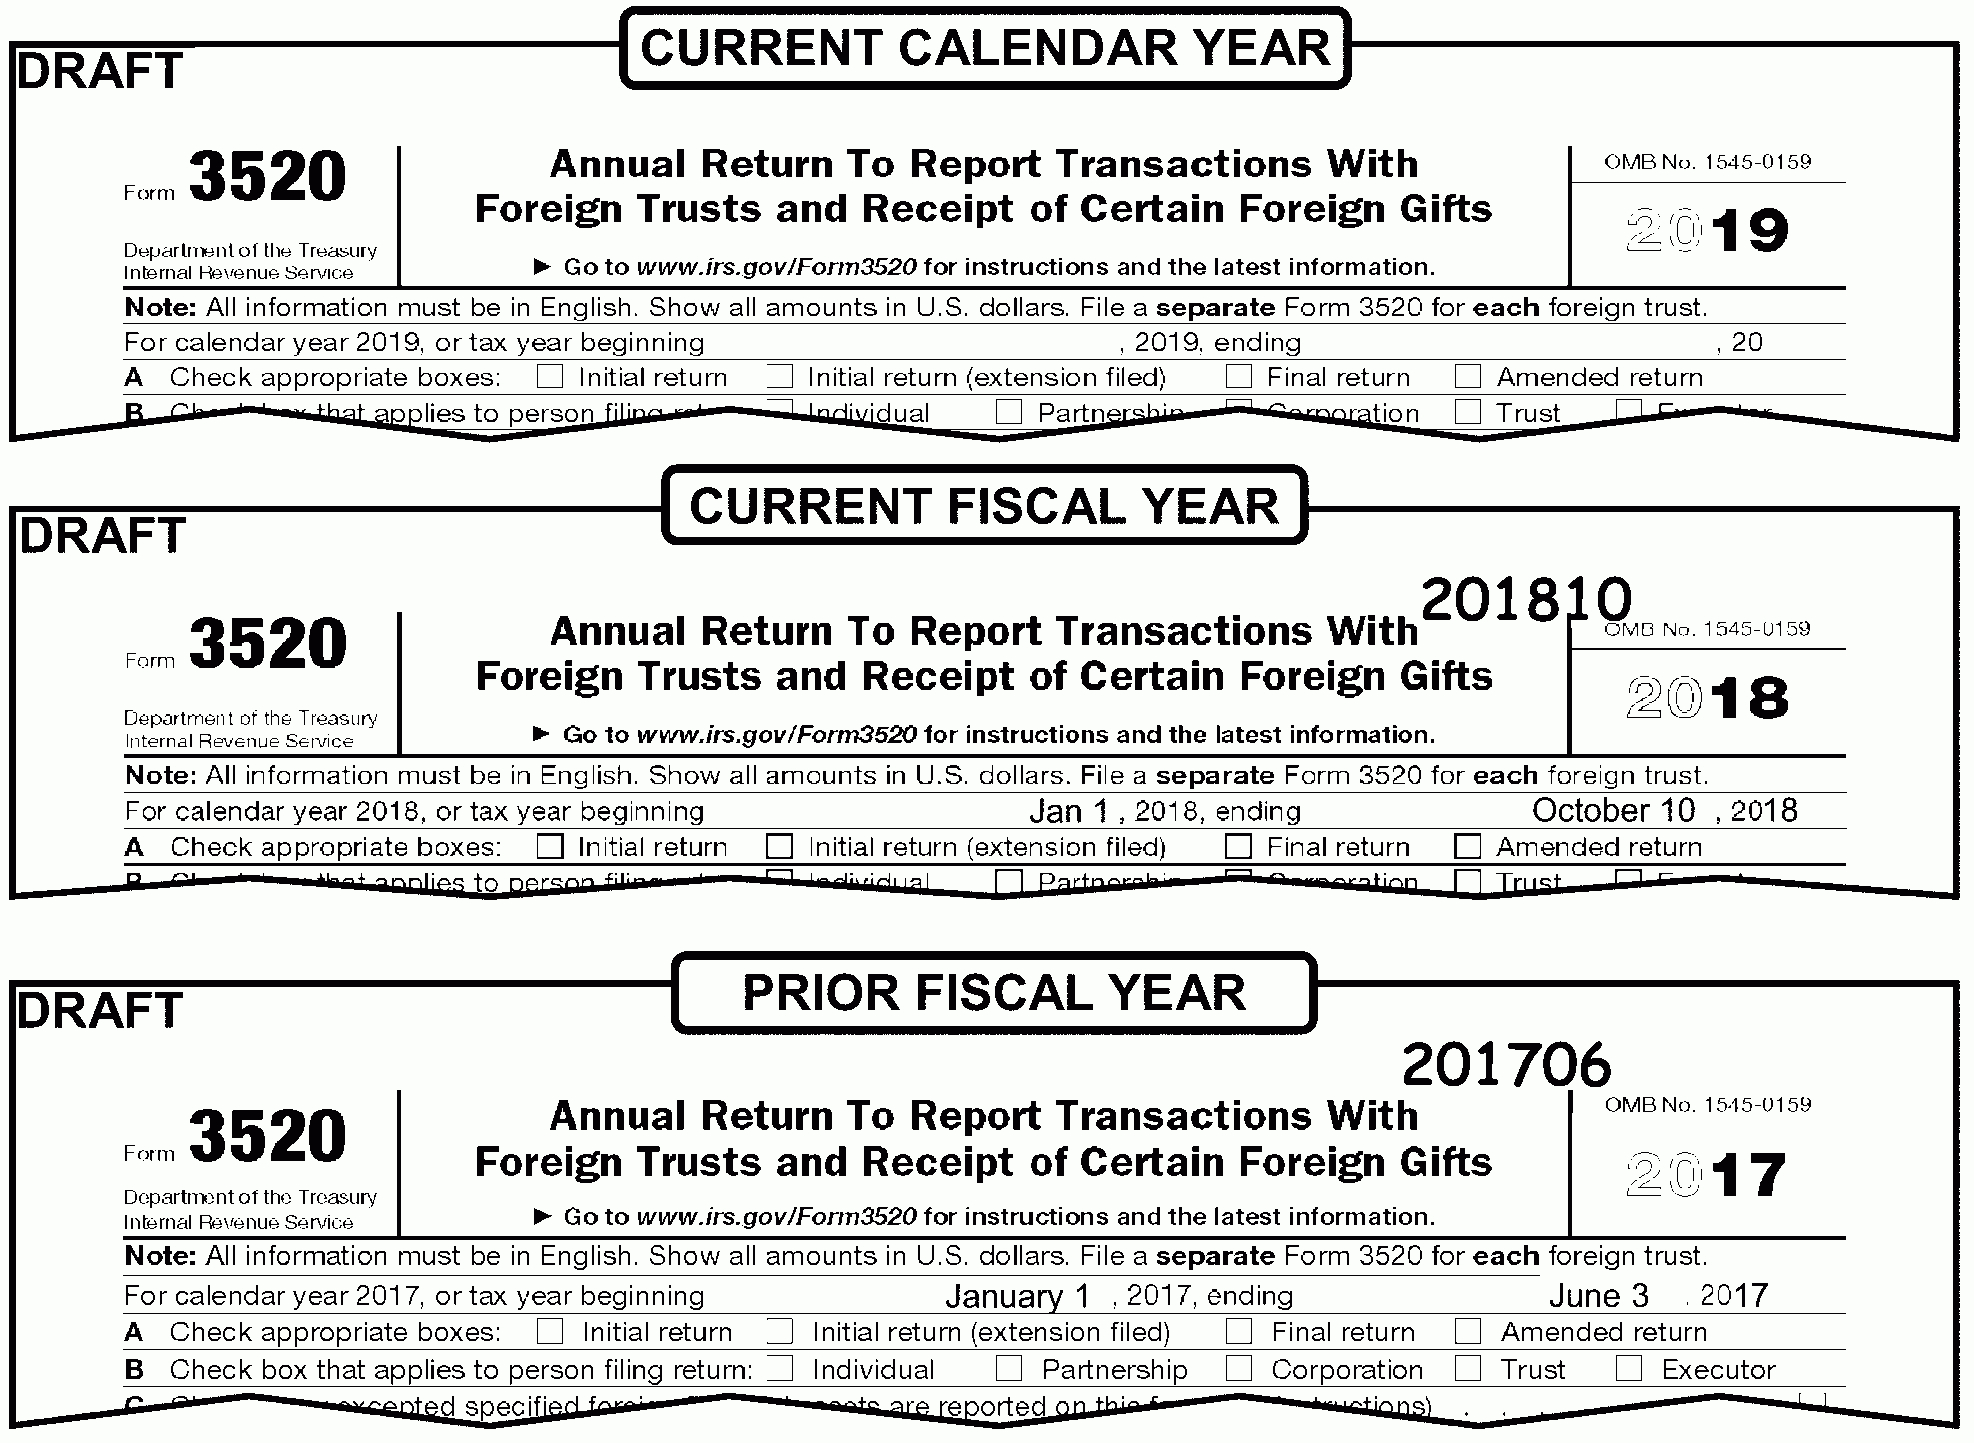 3.21.19 Foreign Trust System | Internal Revenue Service with regard to Isabel A Calendar Year Taxpayer